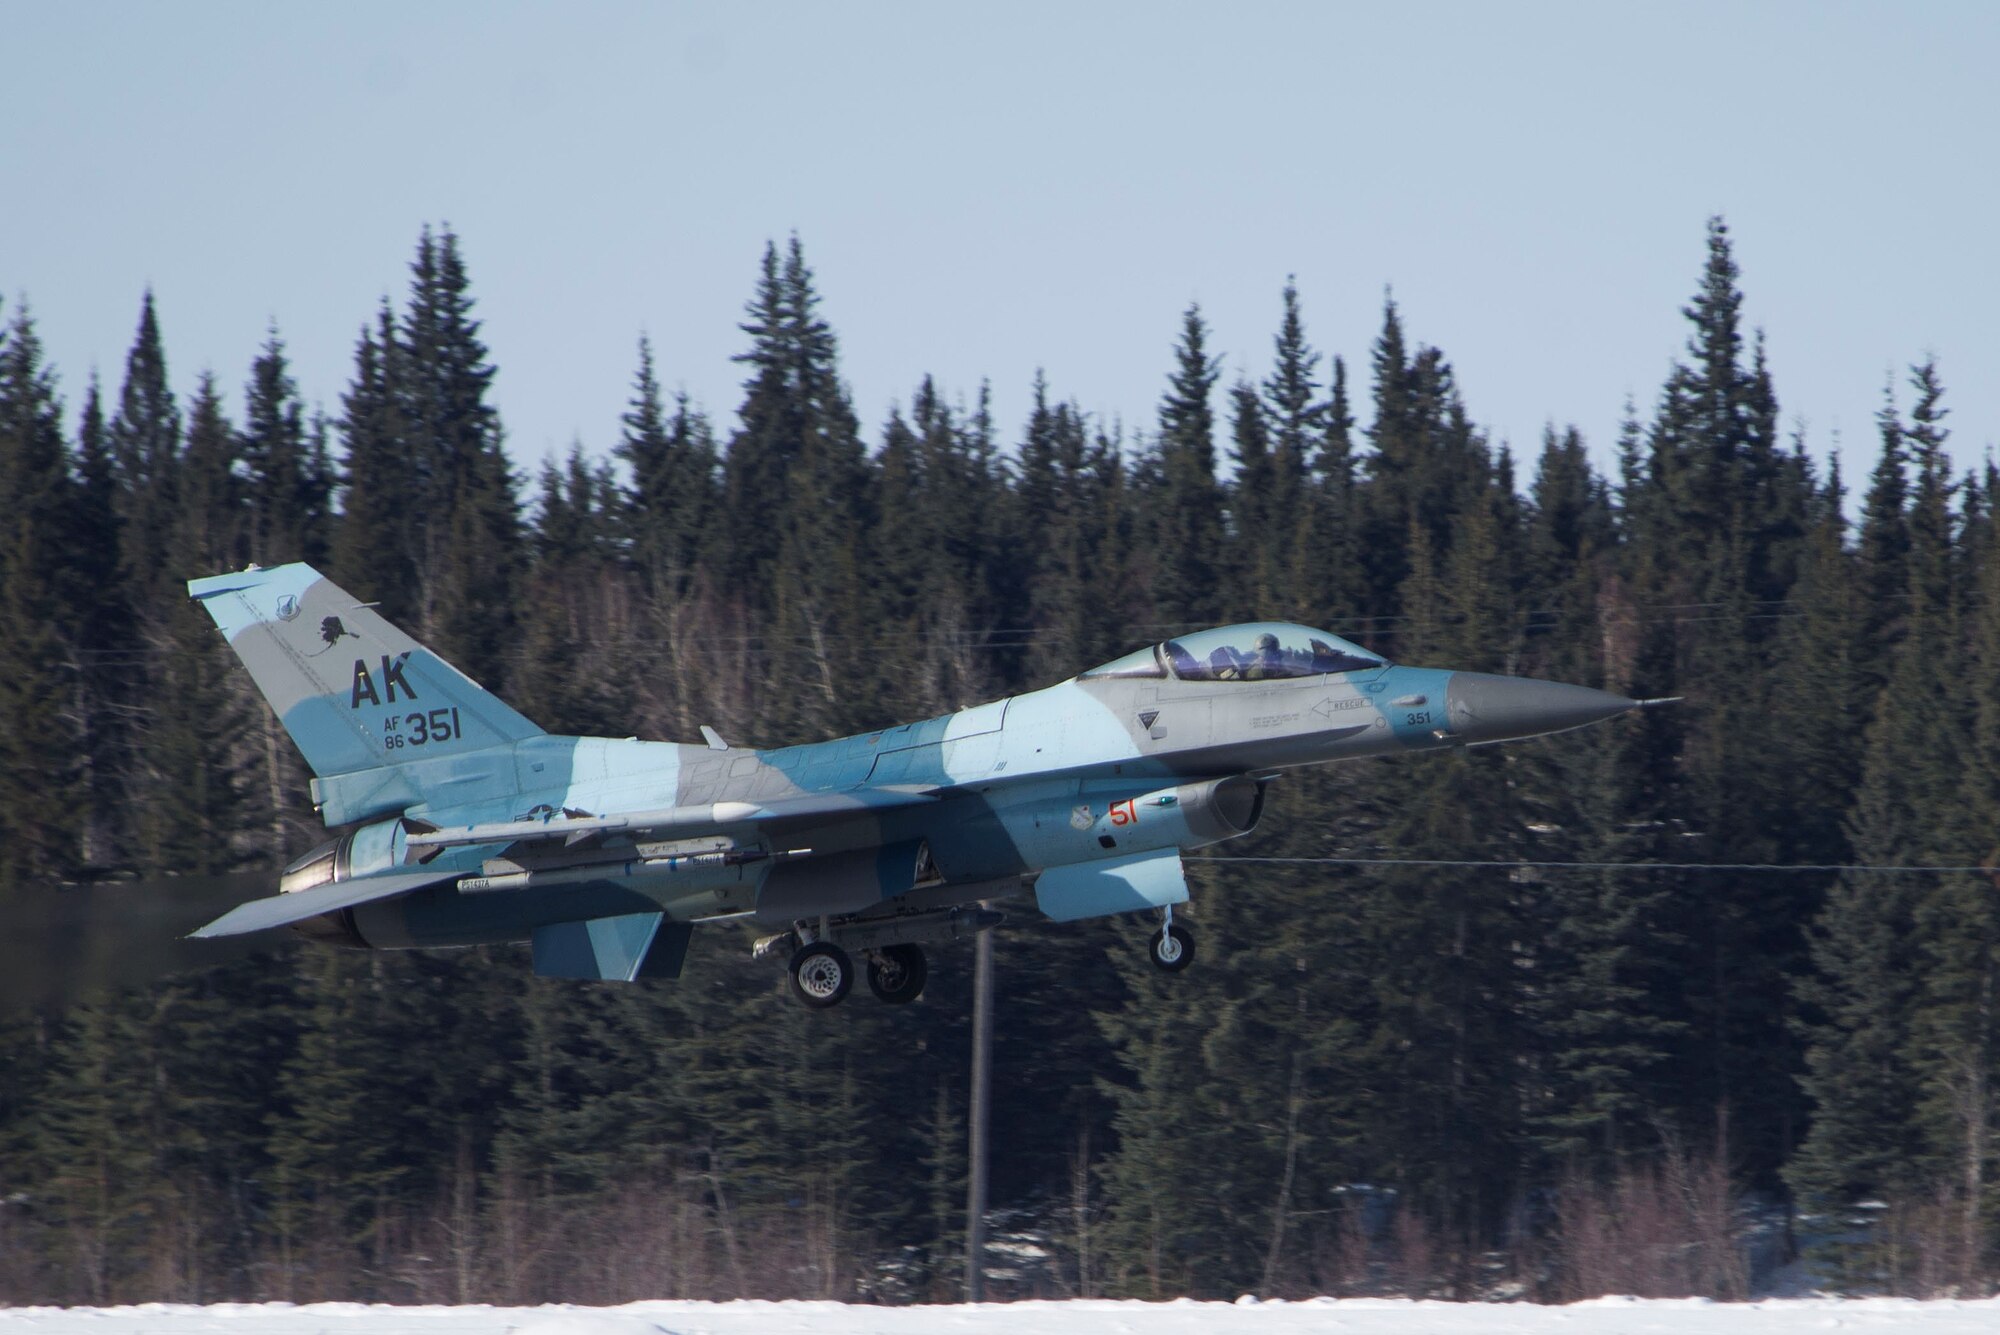 An F-16 Fighting Falcon assigned to the 18th Aggressor Squadron (AGRS) takes off on Eielson Air Force Base, Alaska, April 9, 2020. Pilots assigned to the 18th AGRS met fighter pilots assigned to Joint Base Elmendorf-Richardson, Alaska, in the skies above the Joint Pacific Alaska Range Complex to provide realistic combat training by replicating near-peer adversary capabilities and tactics. (U.S. Air Force photo by Staff Sgt. Zade Vadnais)